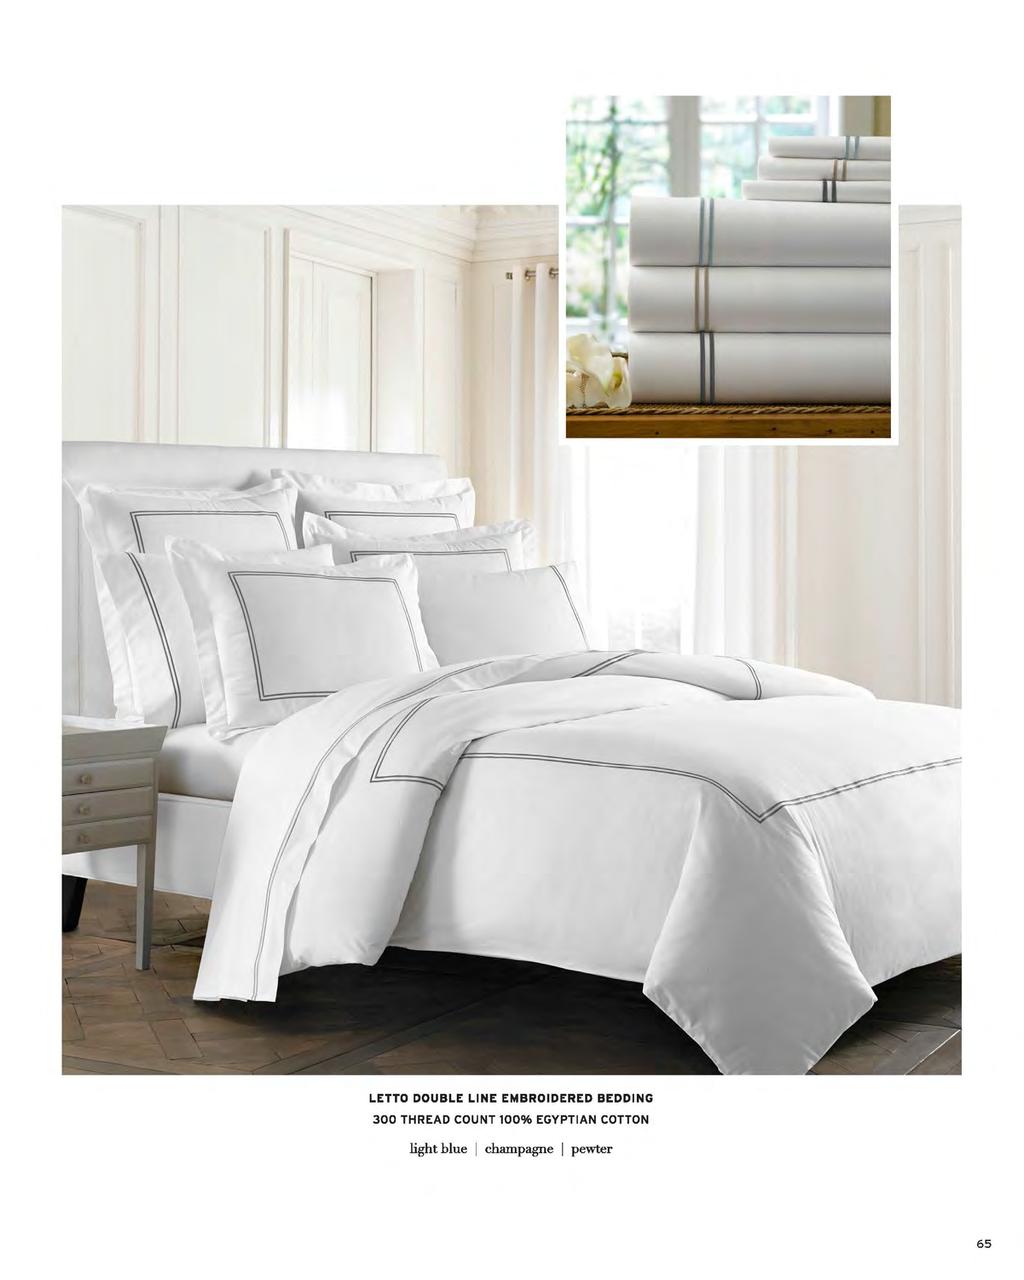 \ ('""' \ LETTO DOUBLE LINE EMBROIDERED BEDDING 300 THREAD